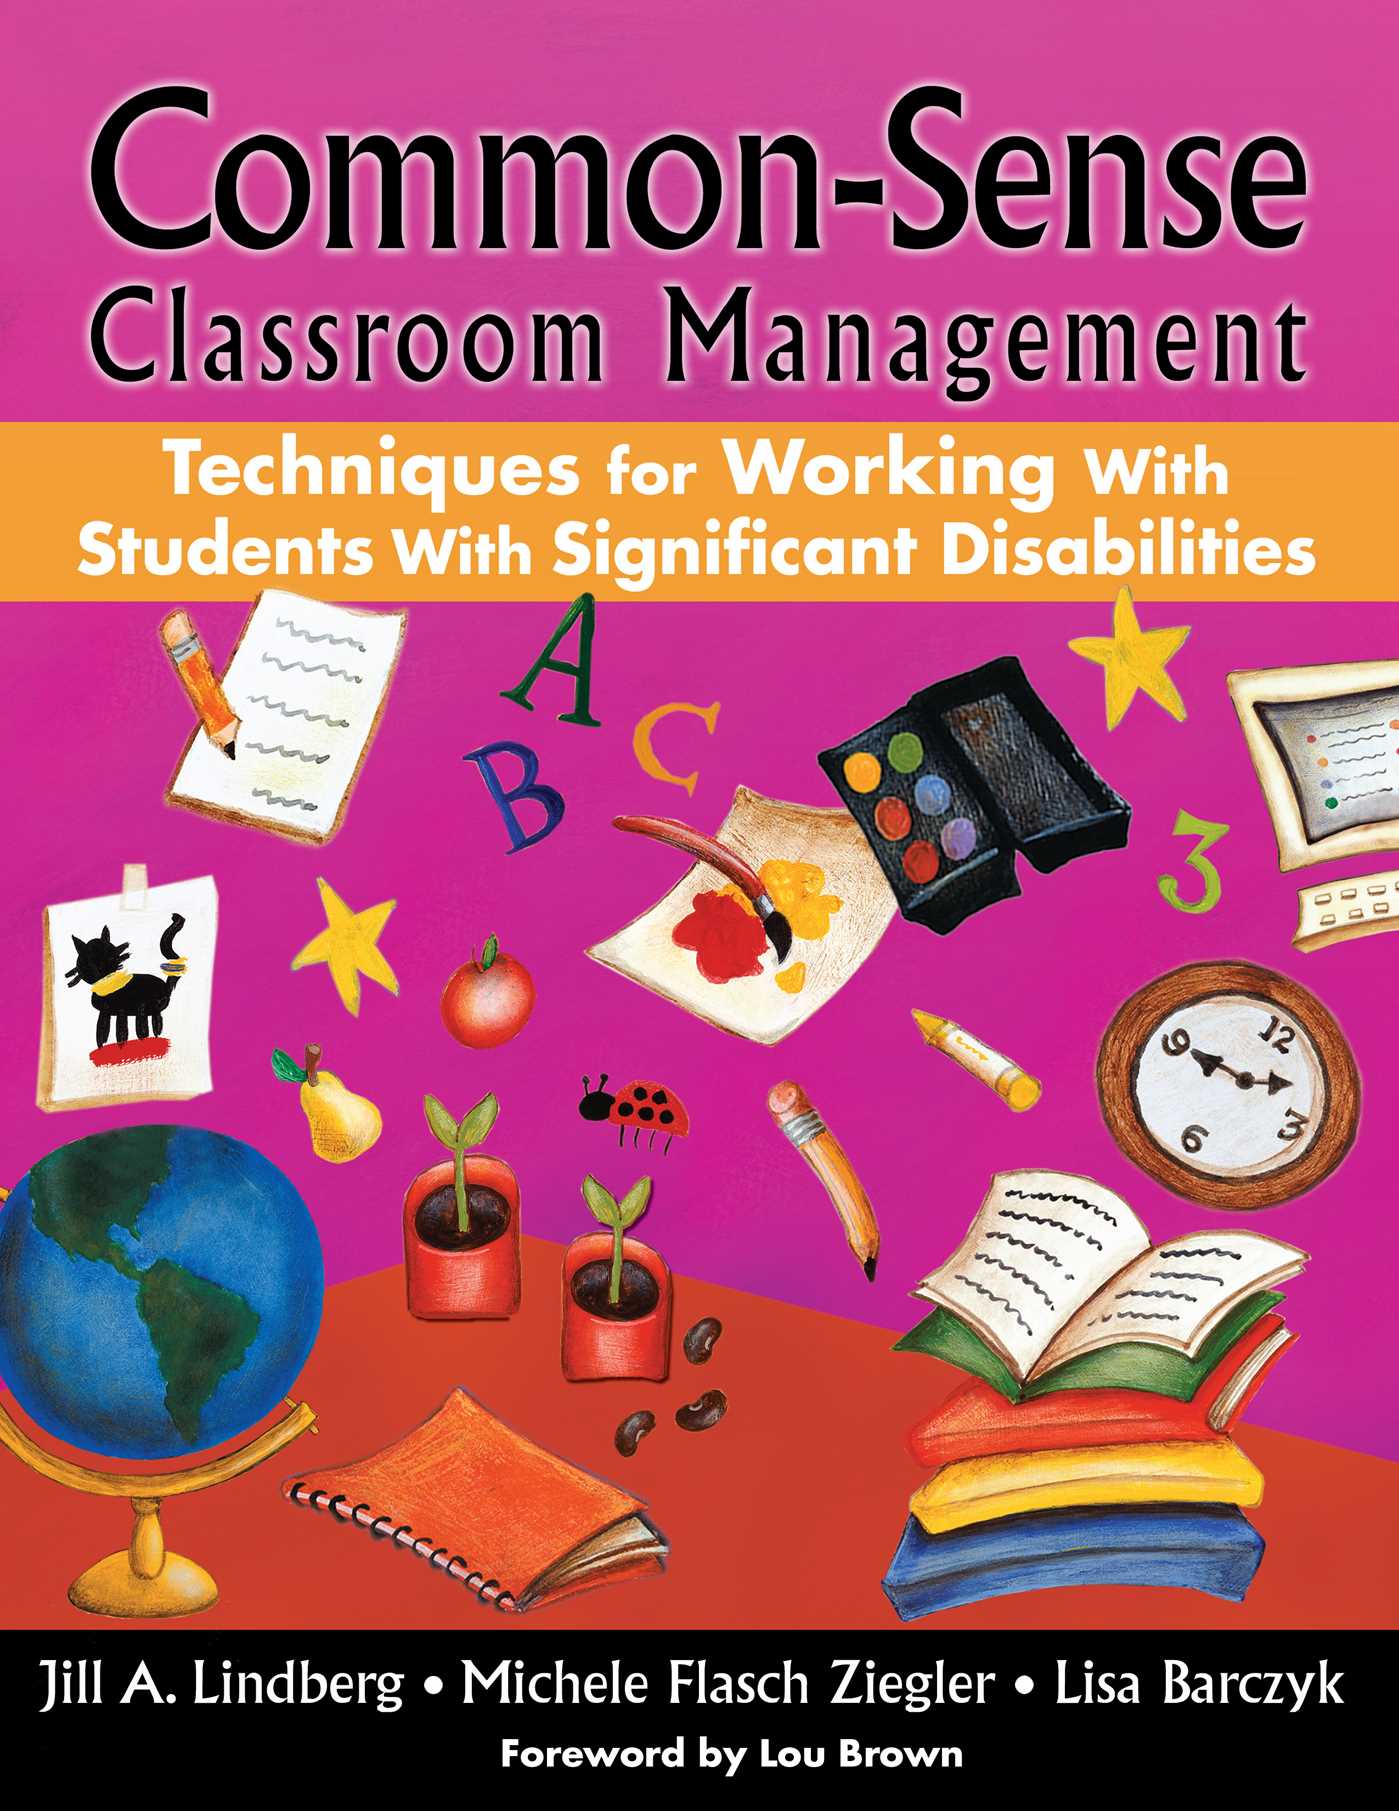 Common-Sense Classroom Management : Techniques for Working with Students with Significant Disabilities